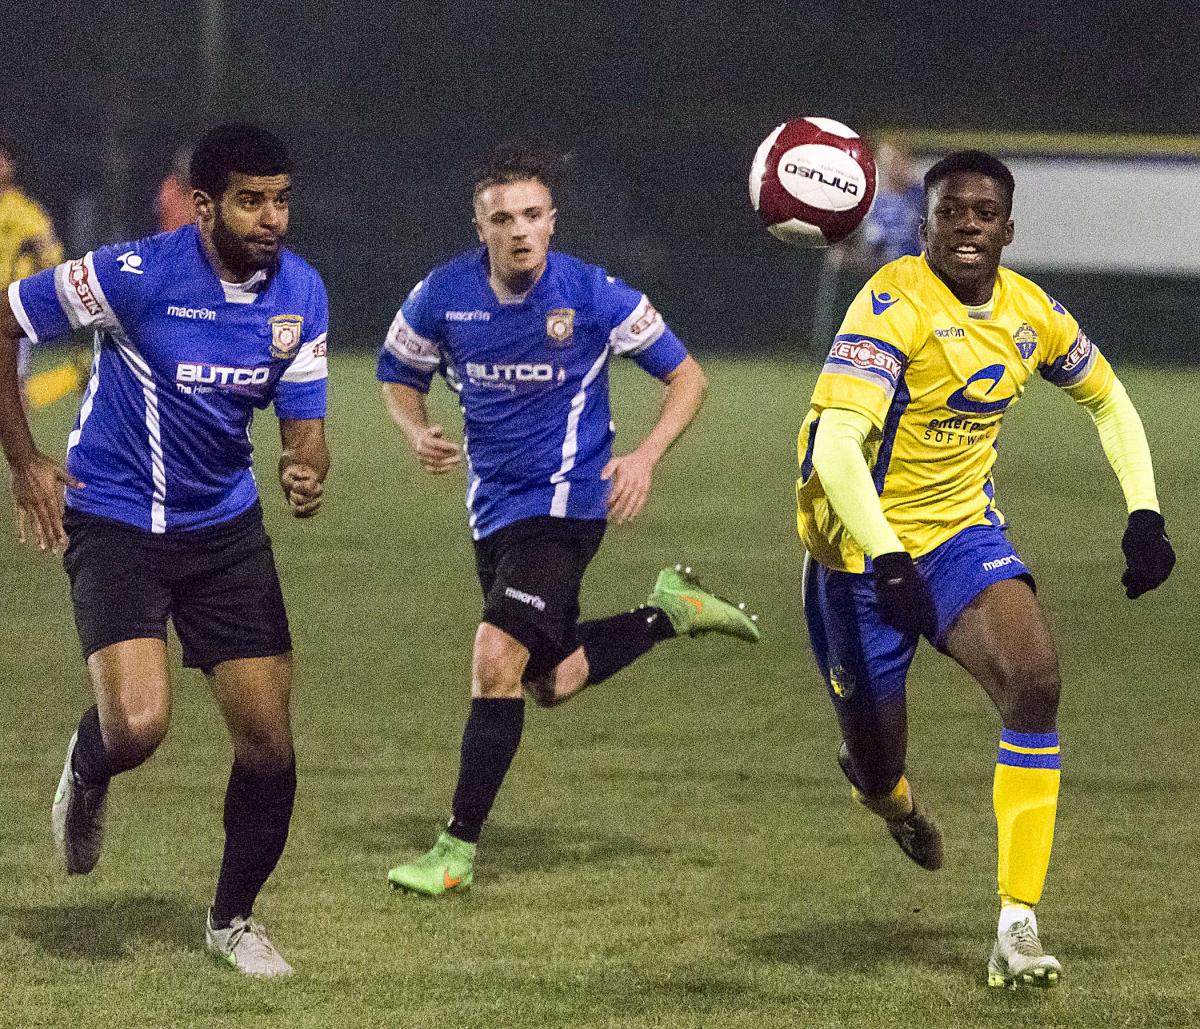 All the action as Town edge out Sutton Coldfield at a cold and foggy Cantilever Park on Saturday. Pictures by John Hopkins